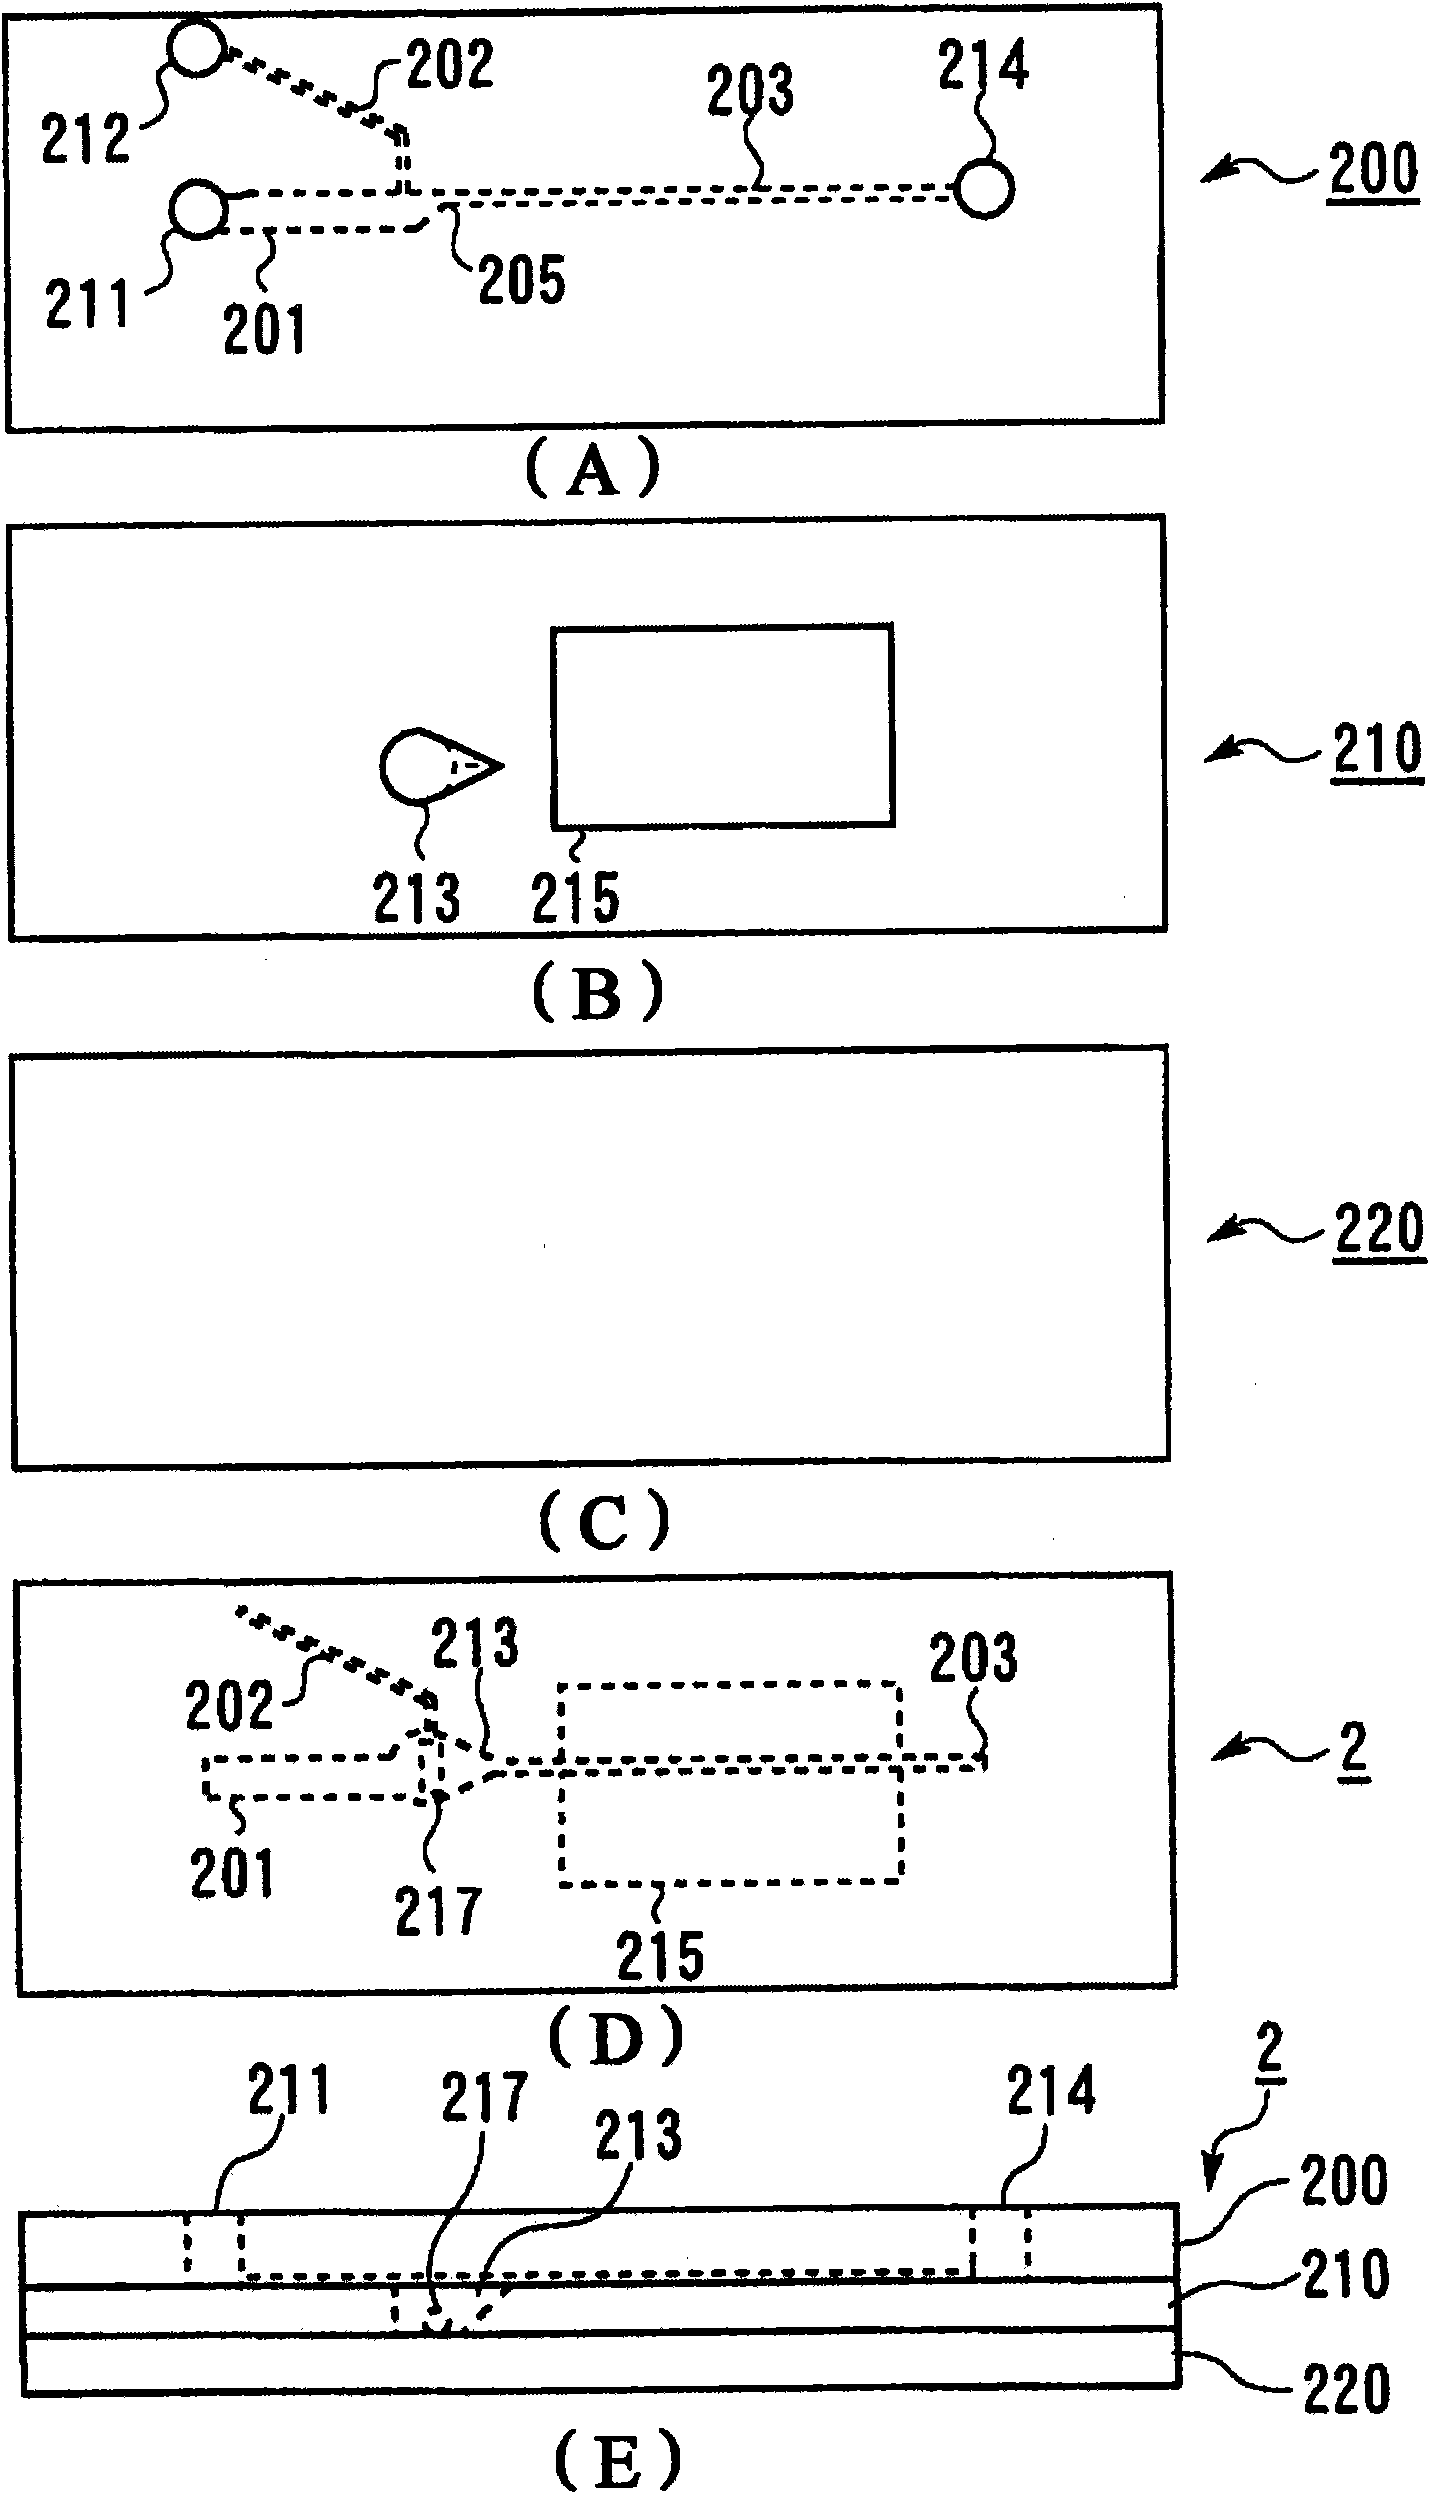 Microchip and blood monitoring device